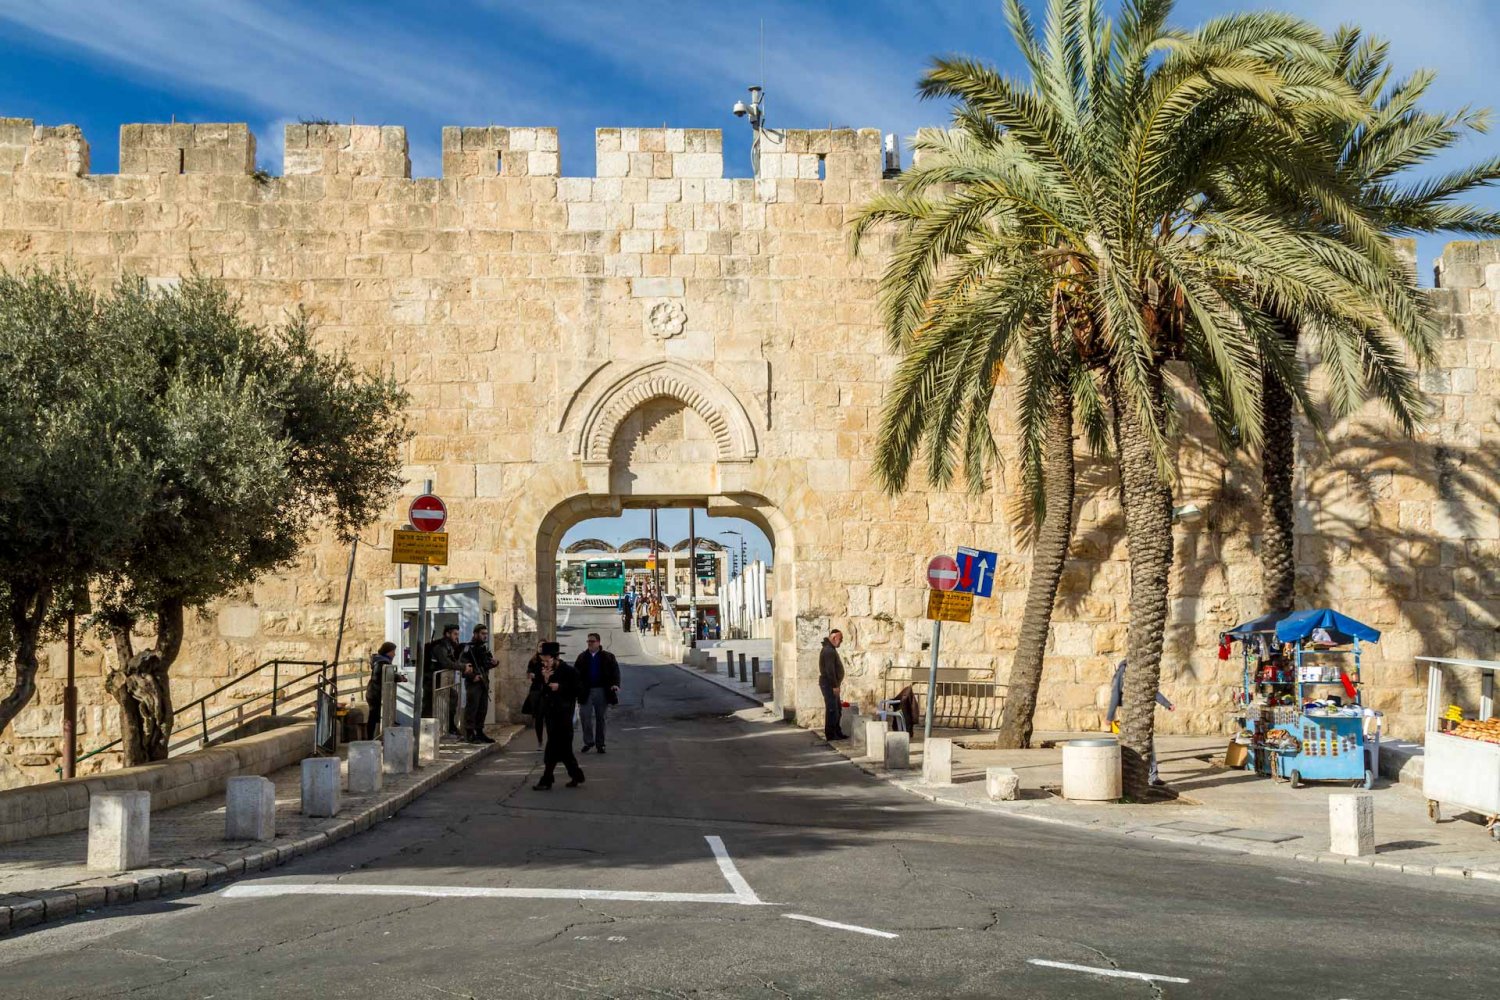 Dung Gate or Bab al-Maghariba, one of the gates to Jerusalem's Old City